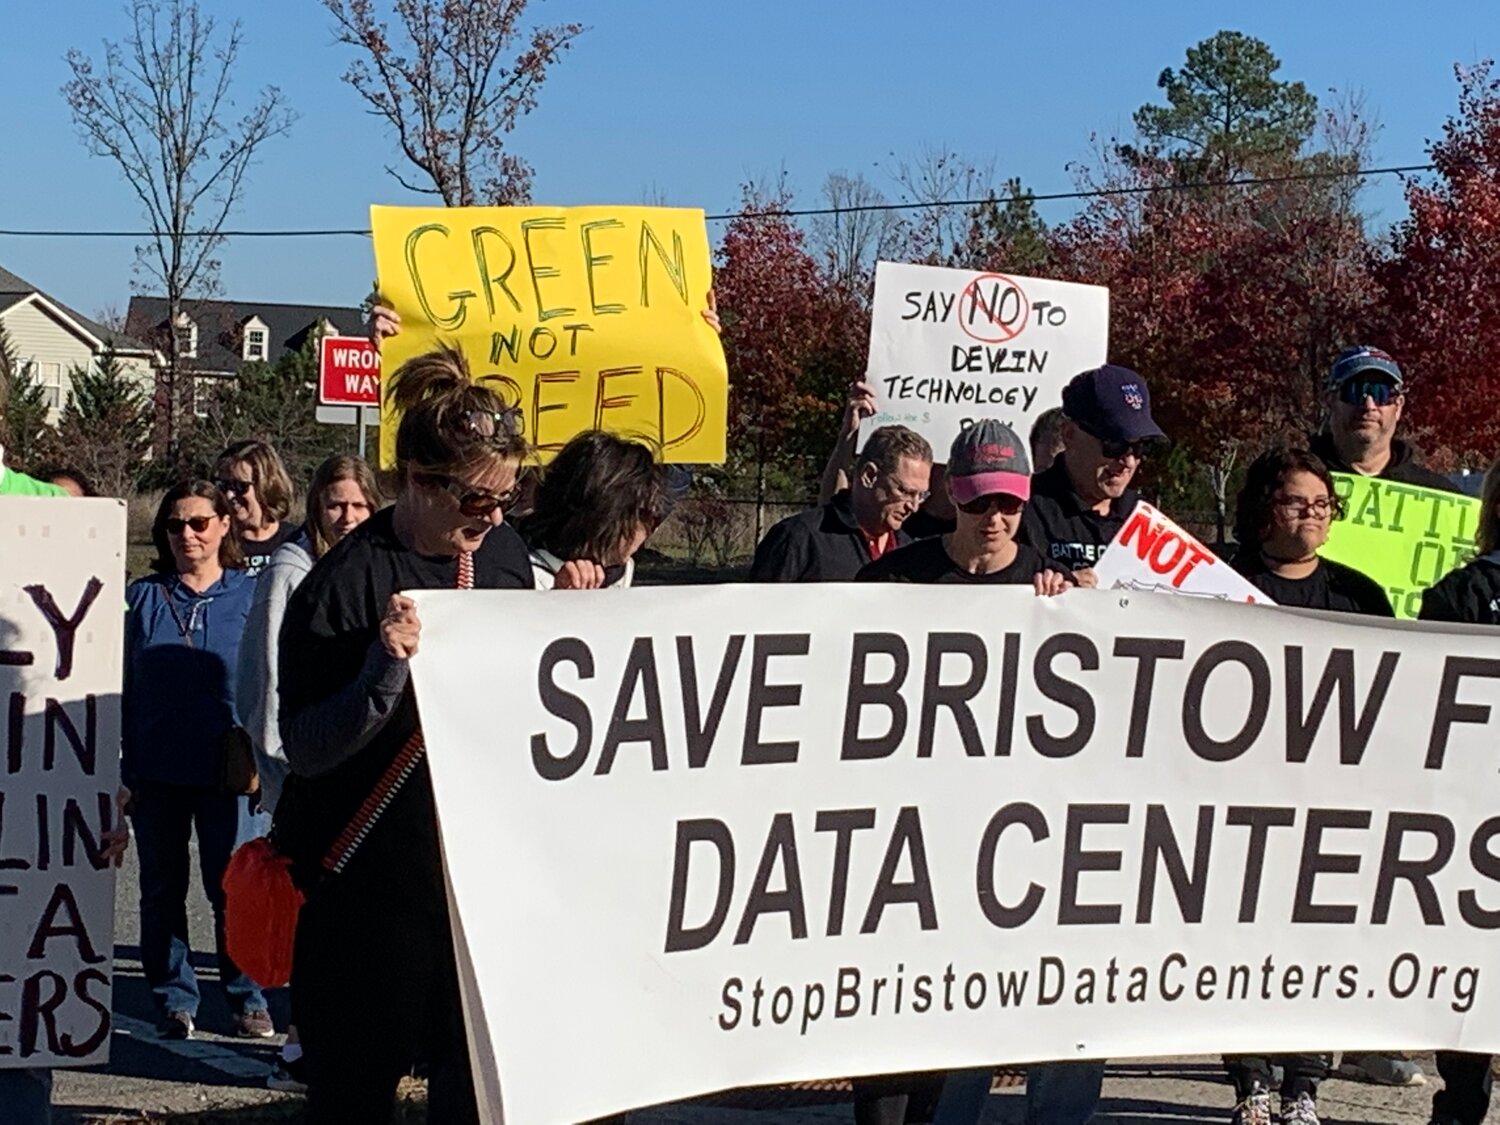 Western Prince William residents rally against Stanley Martin's proposed Devlin Tech Park at a rally, Nov. 19 along Linton Hall Road in Bristow.